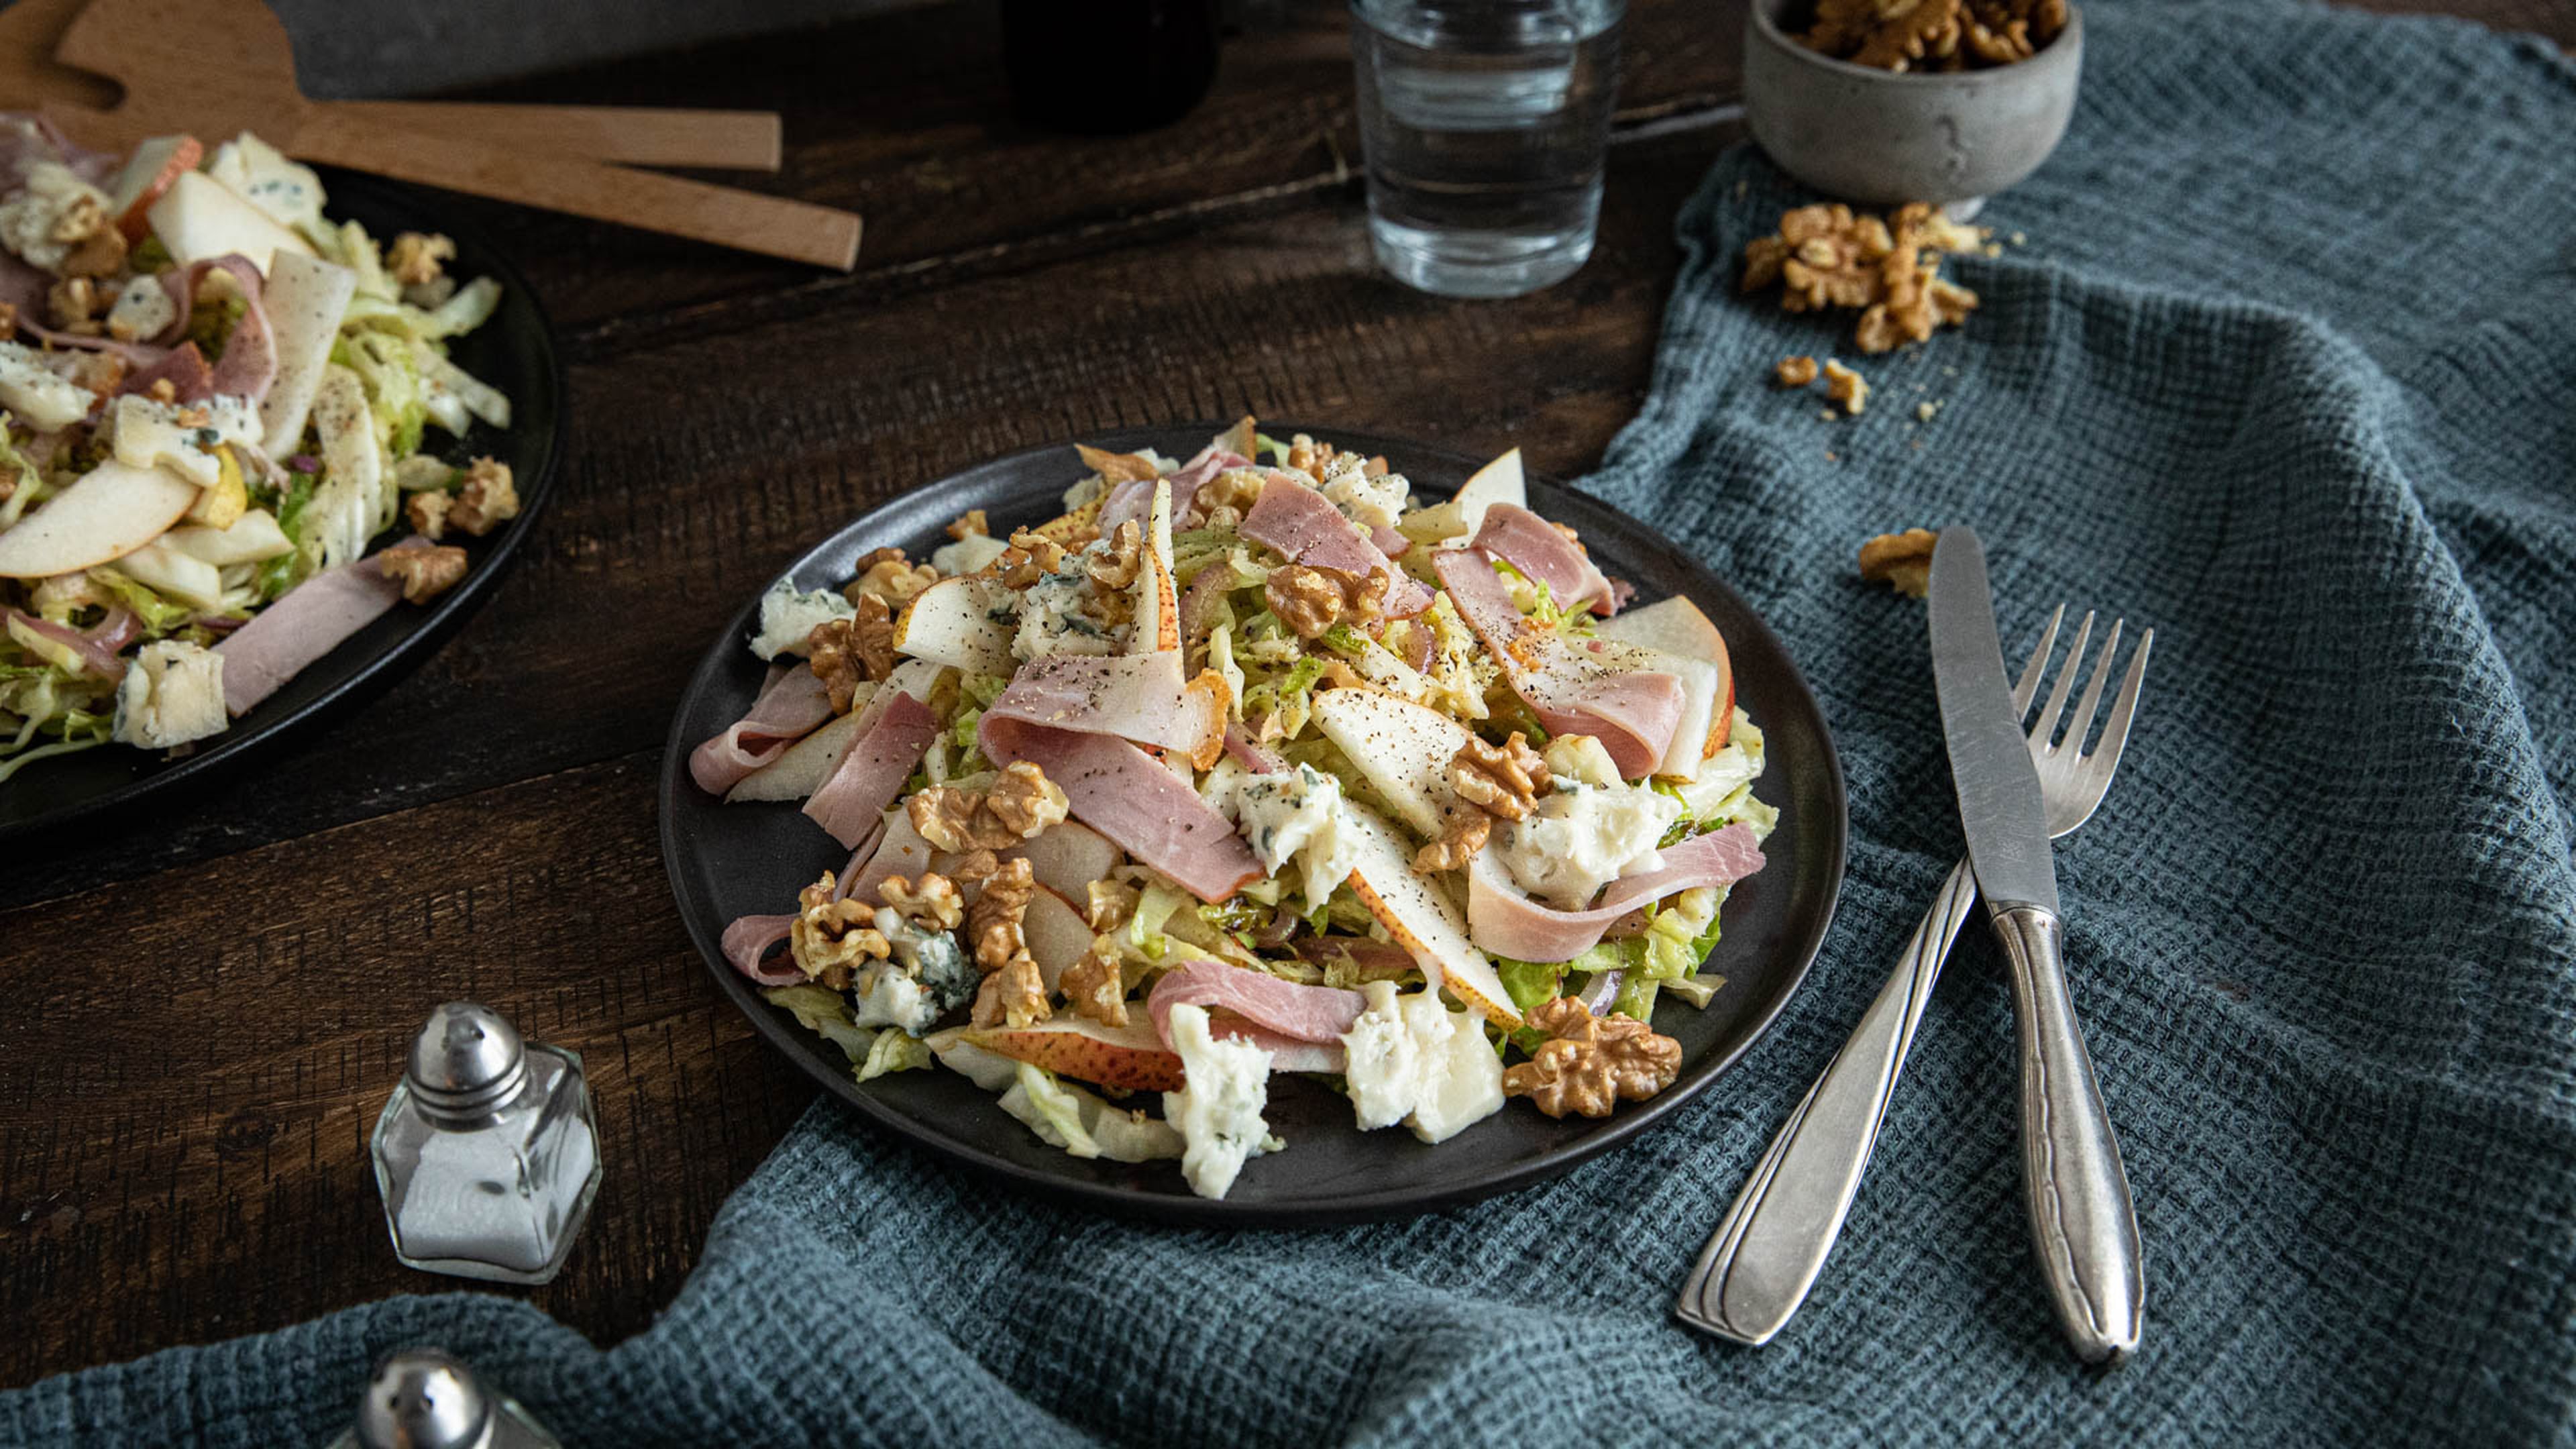 Savoy cabbage salad with pears, walnuts, and ham